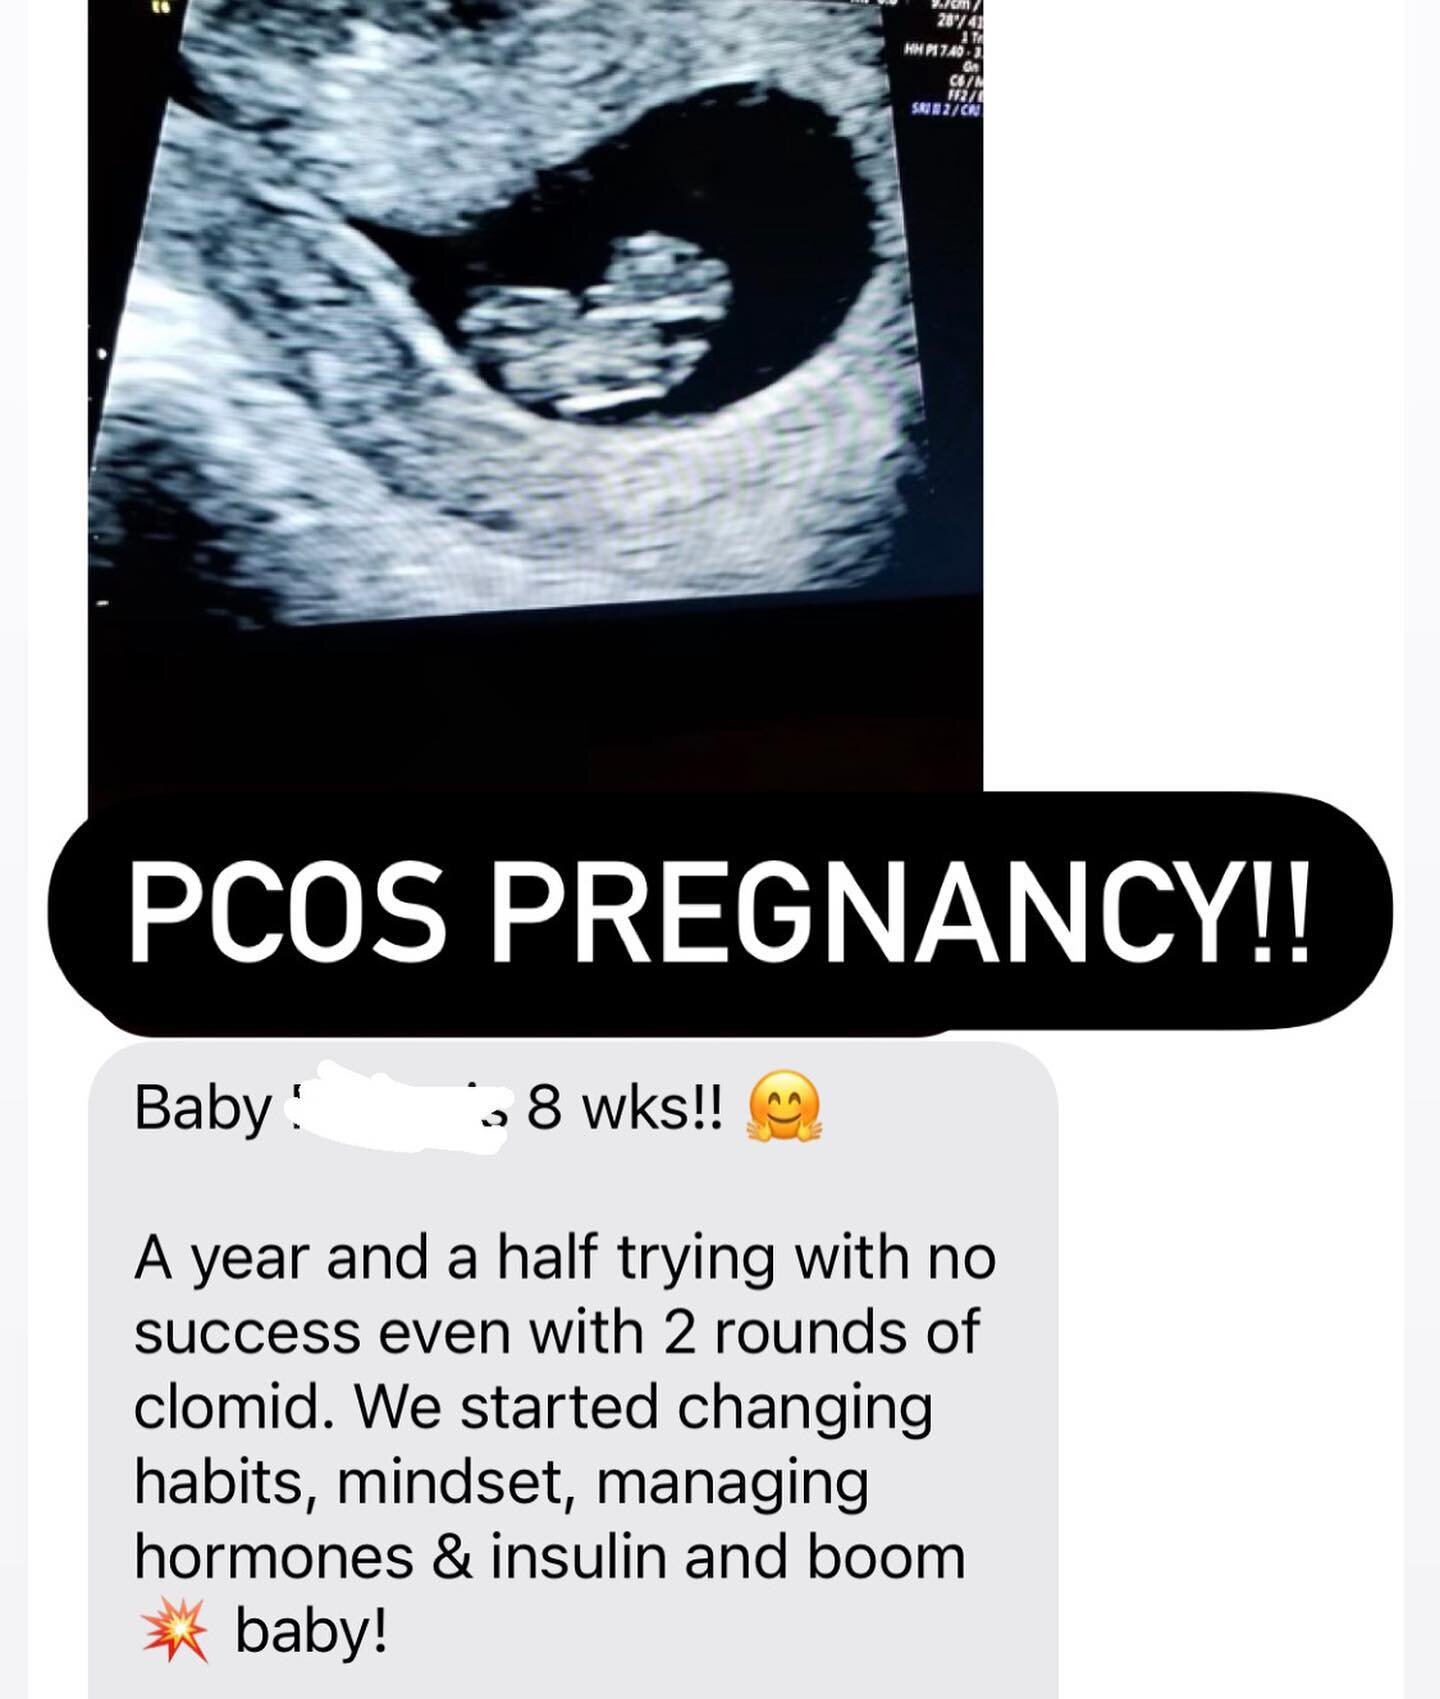 Over a year and a half working with her doctors. And then we started together and little over a few months fully committed to our process and BOOM 💥! This client is now at week 18! Exciting to see baby continue to grow and thrive! #pcoswarrior #pcos